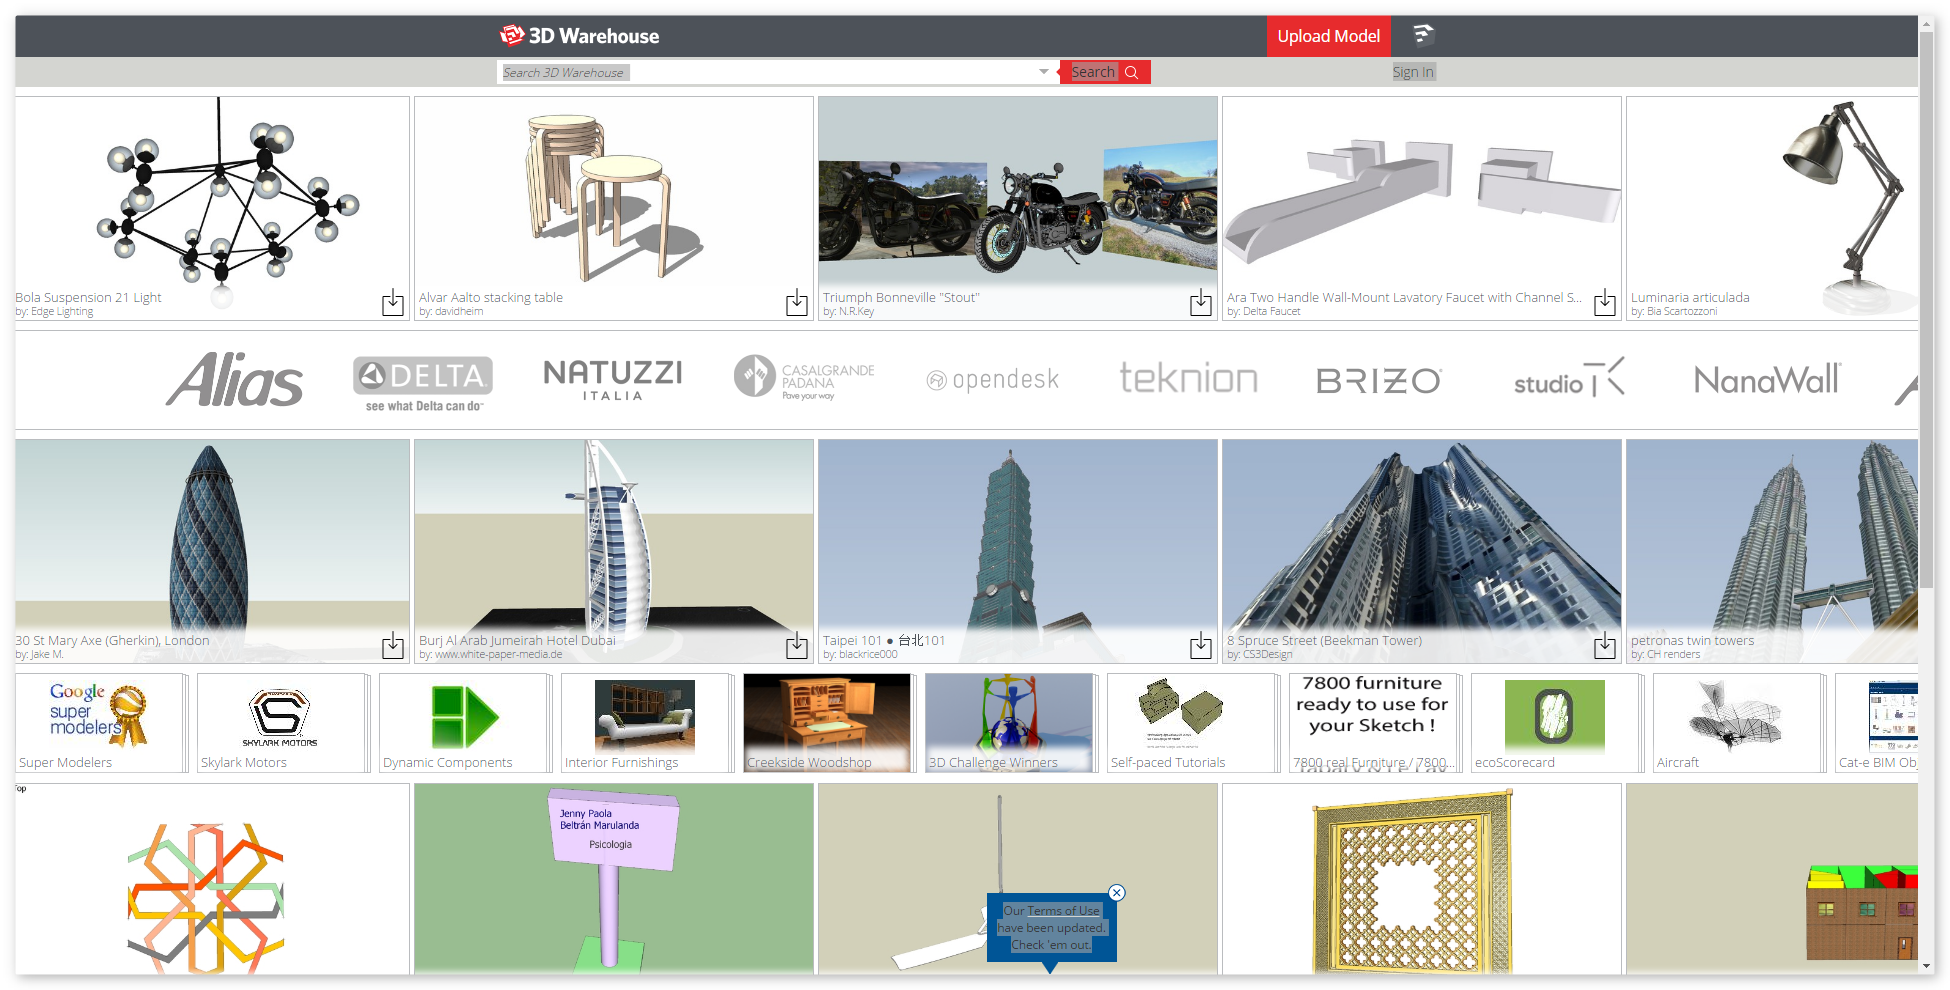 More than 650 high quality 3D models available in Sketchup 